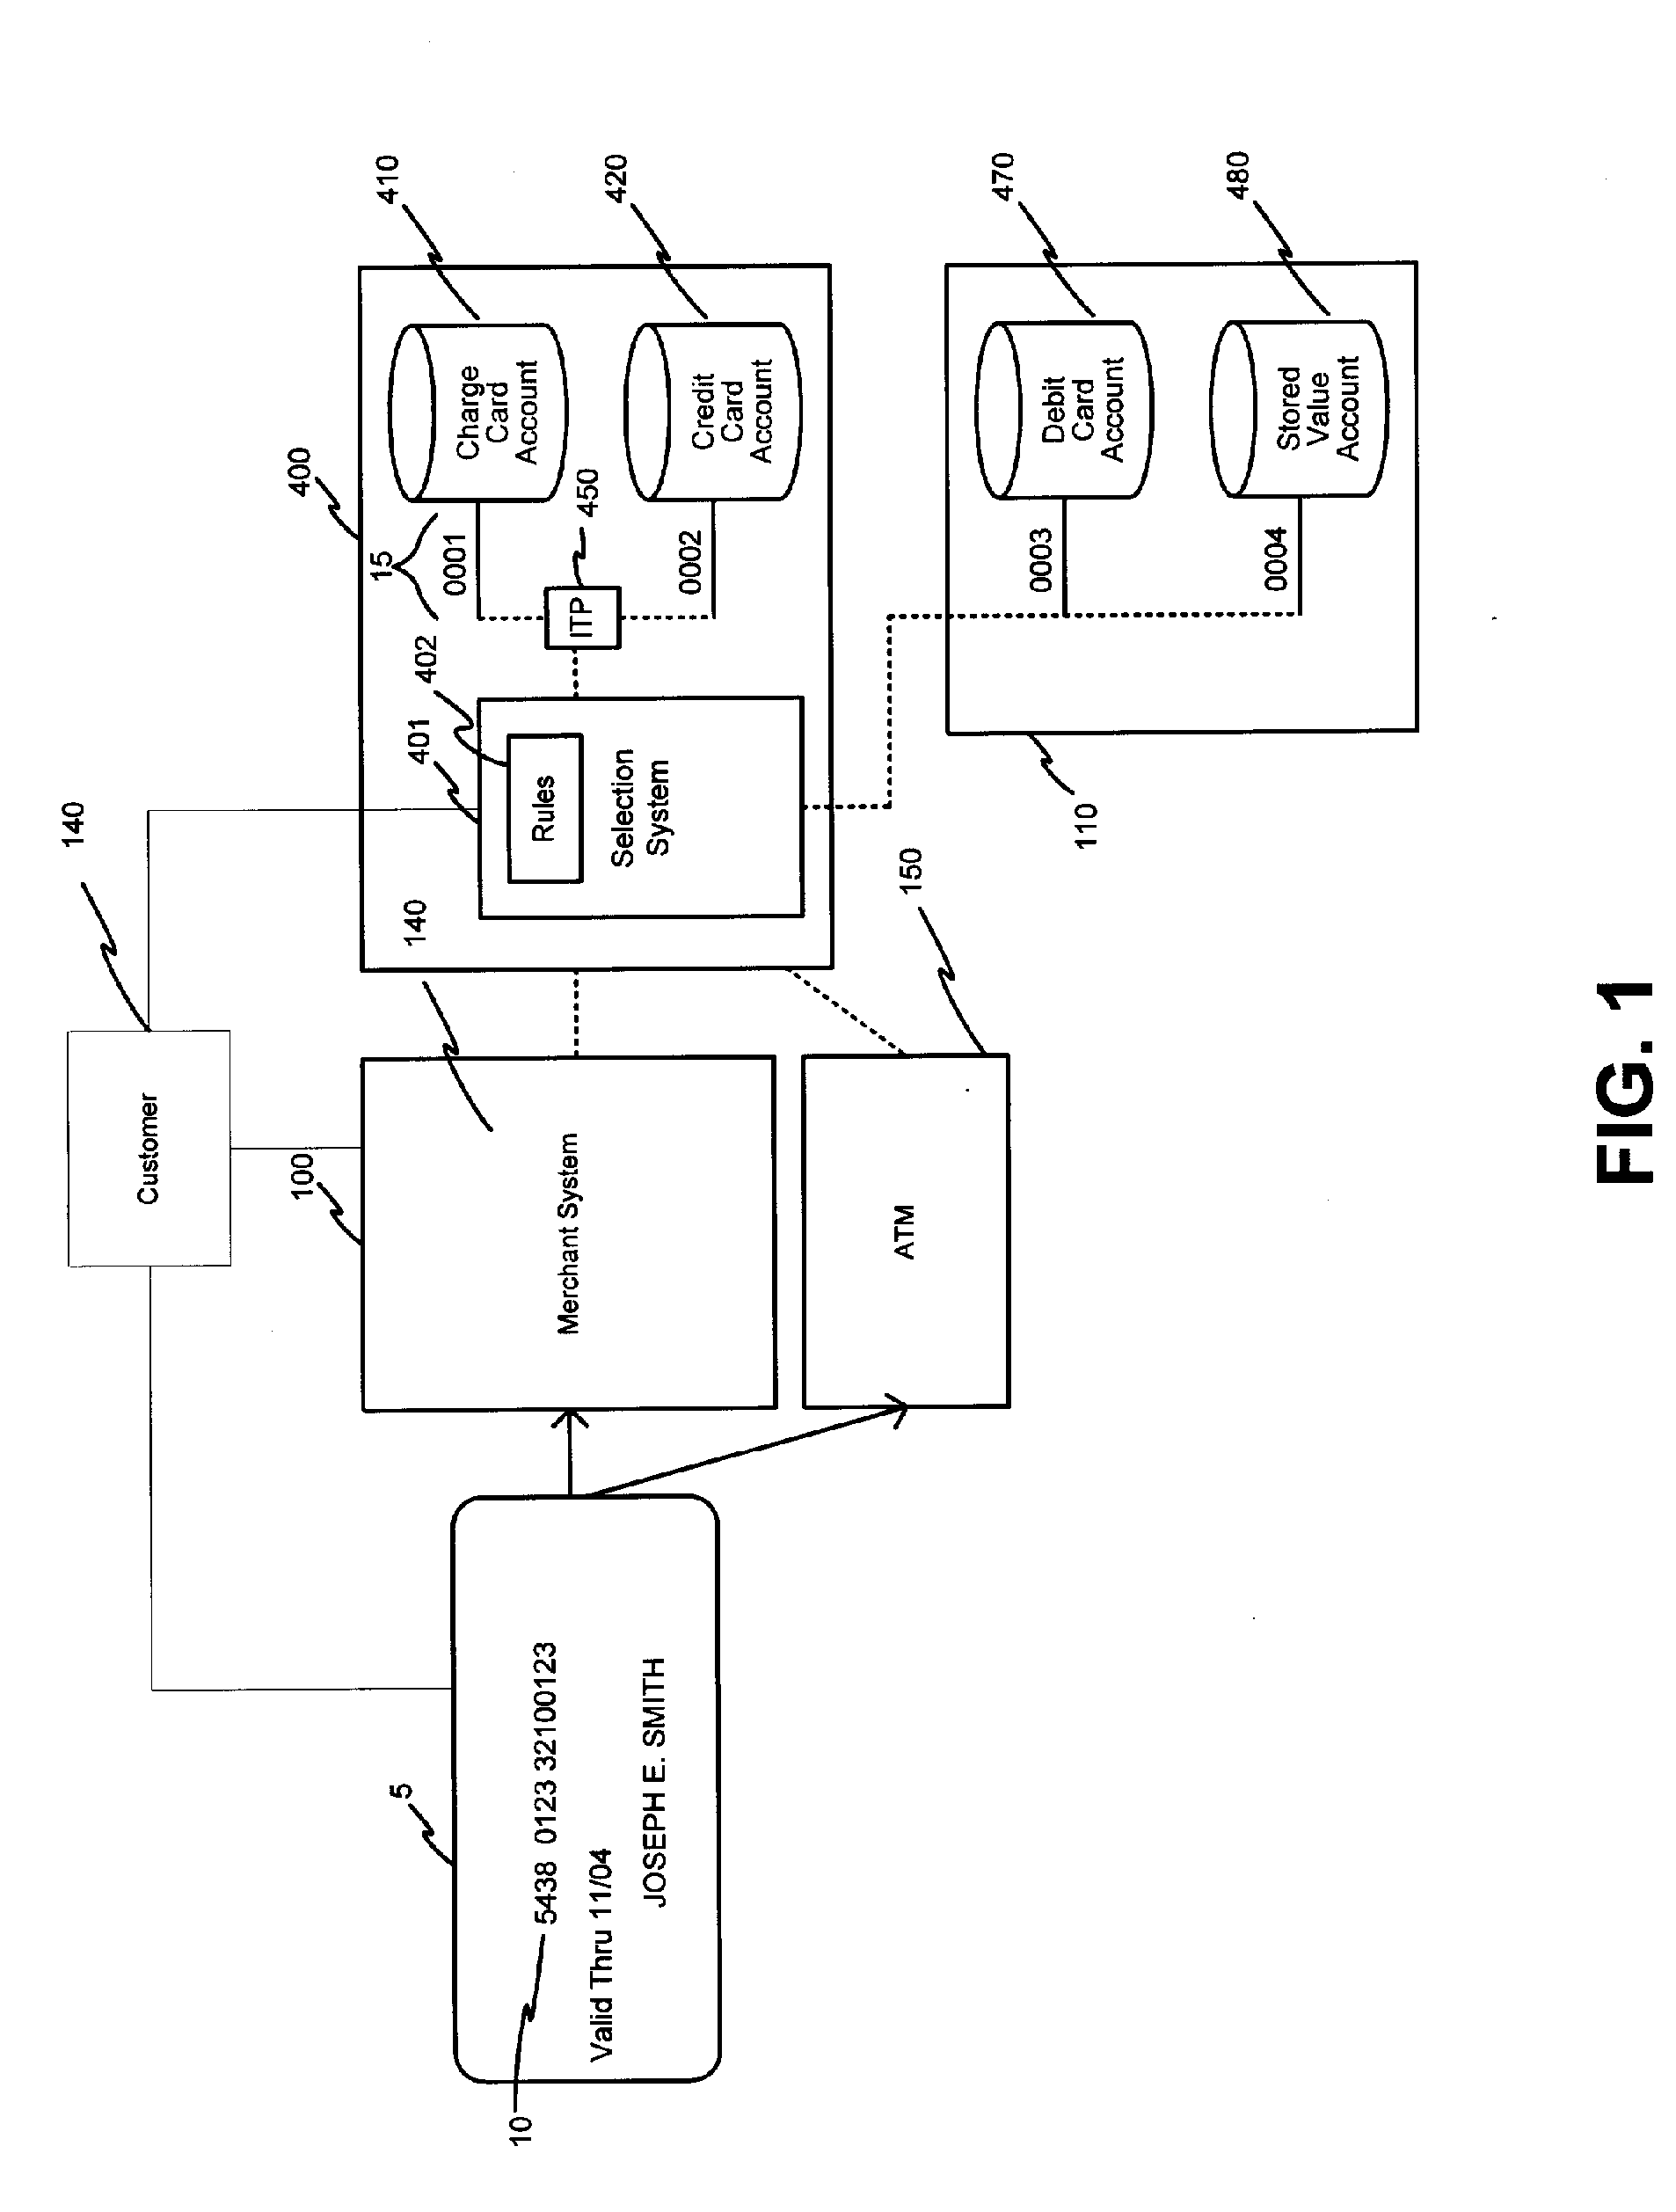 Systems, methods, and devices for combined credit card and stored value transaction accounts